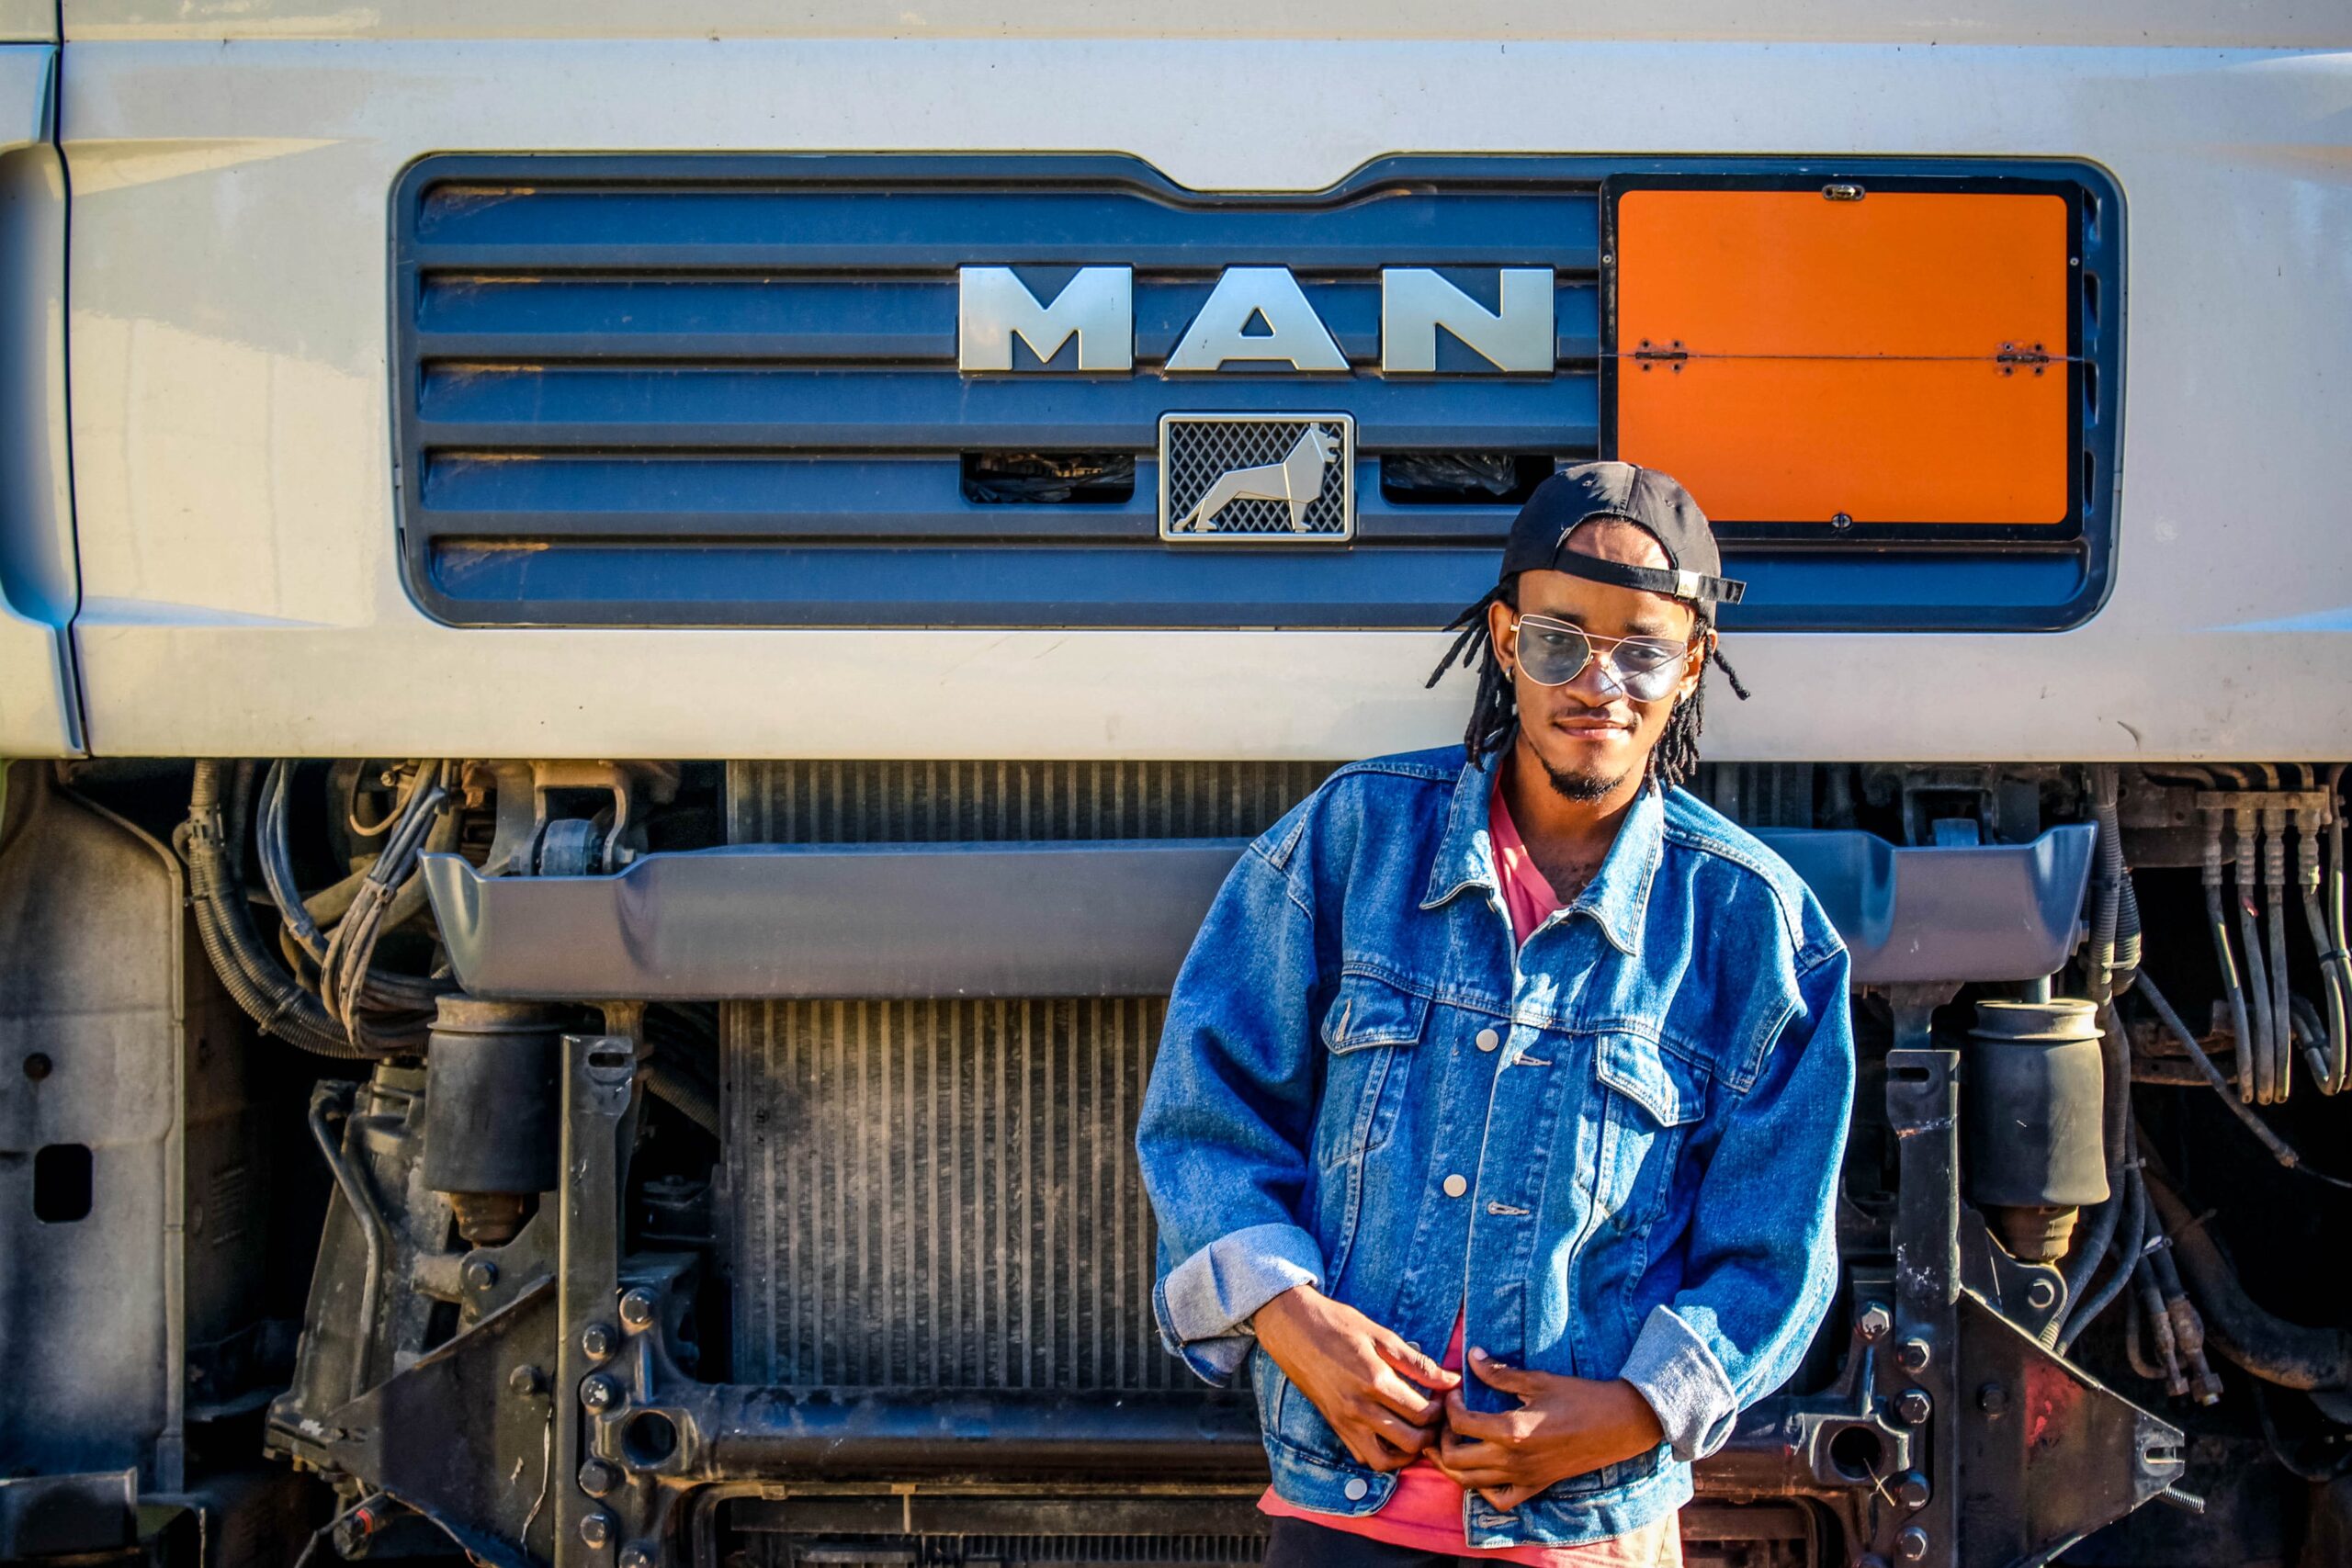 A person standing and smiling in front of an open MAN semi-truck